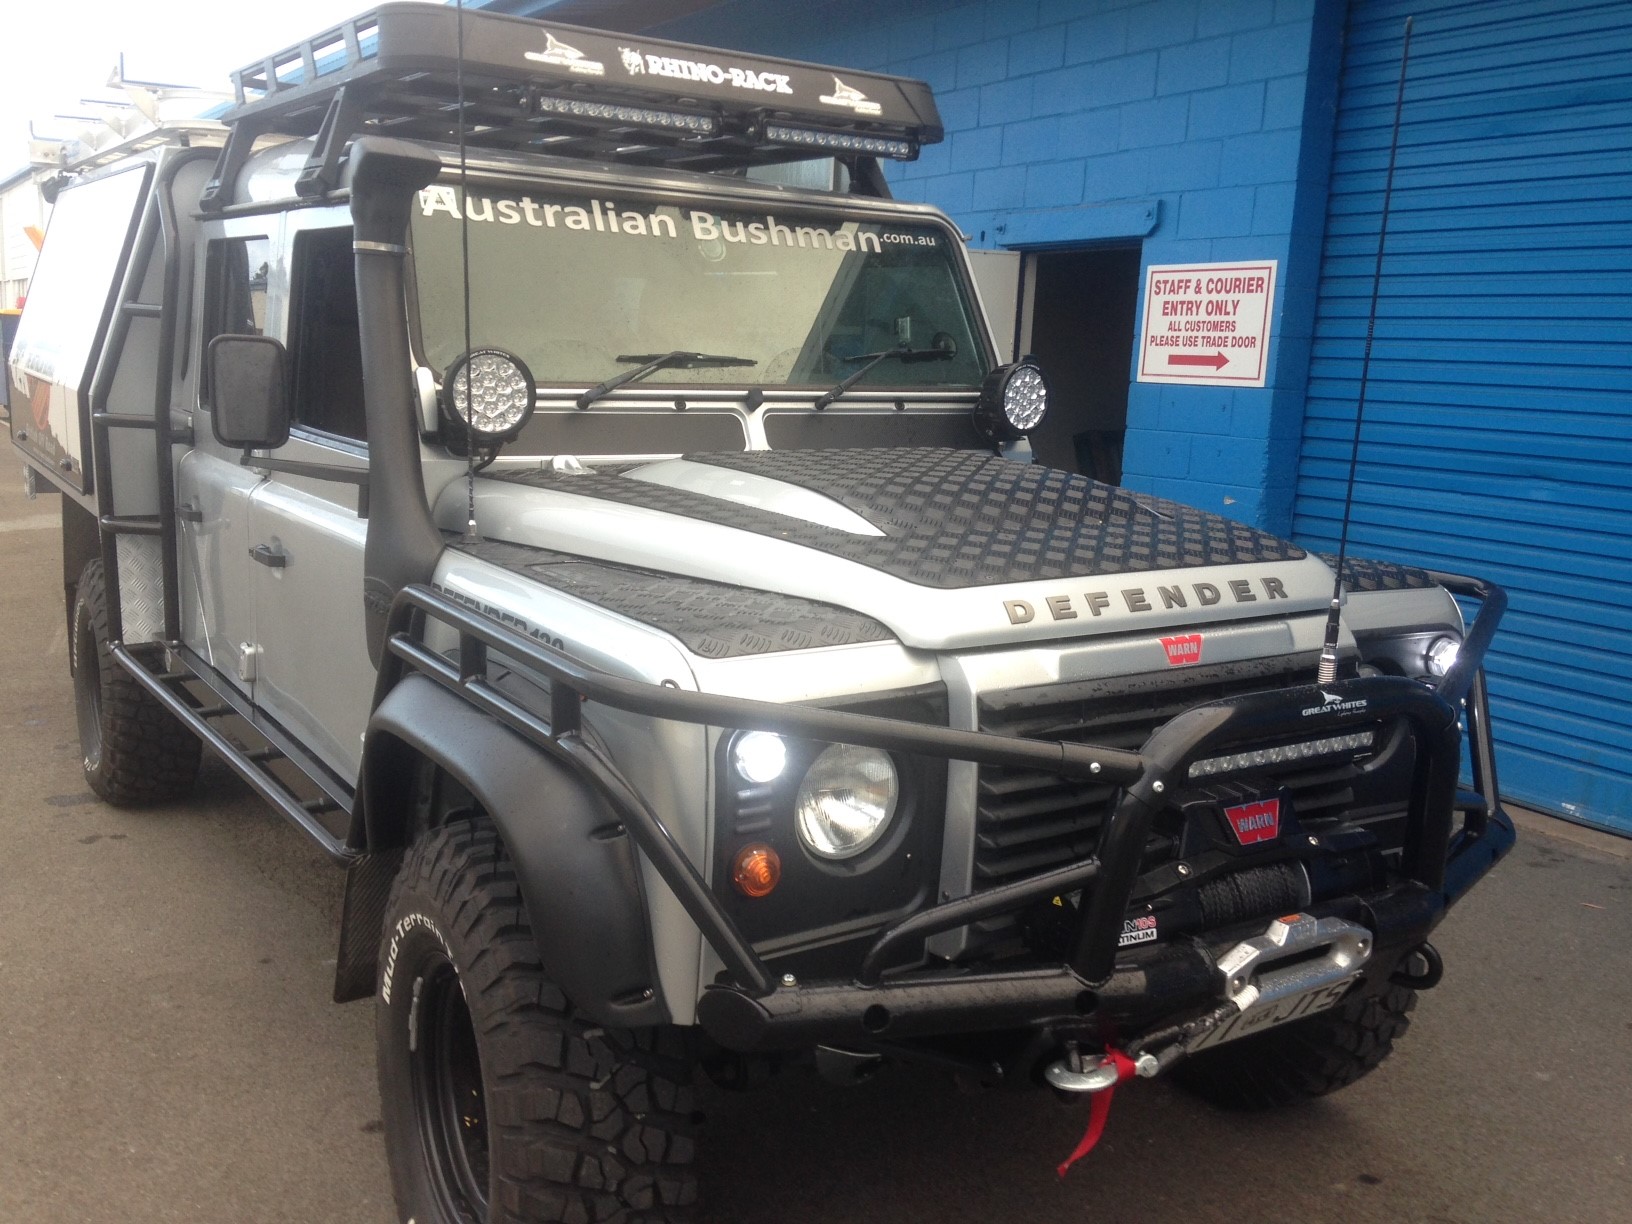 The Australian Bushman Land Rover Defender after the British Off Road treatment